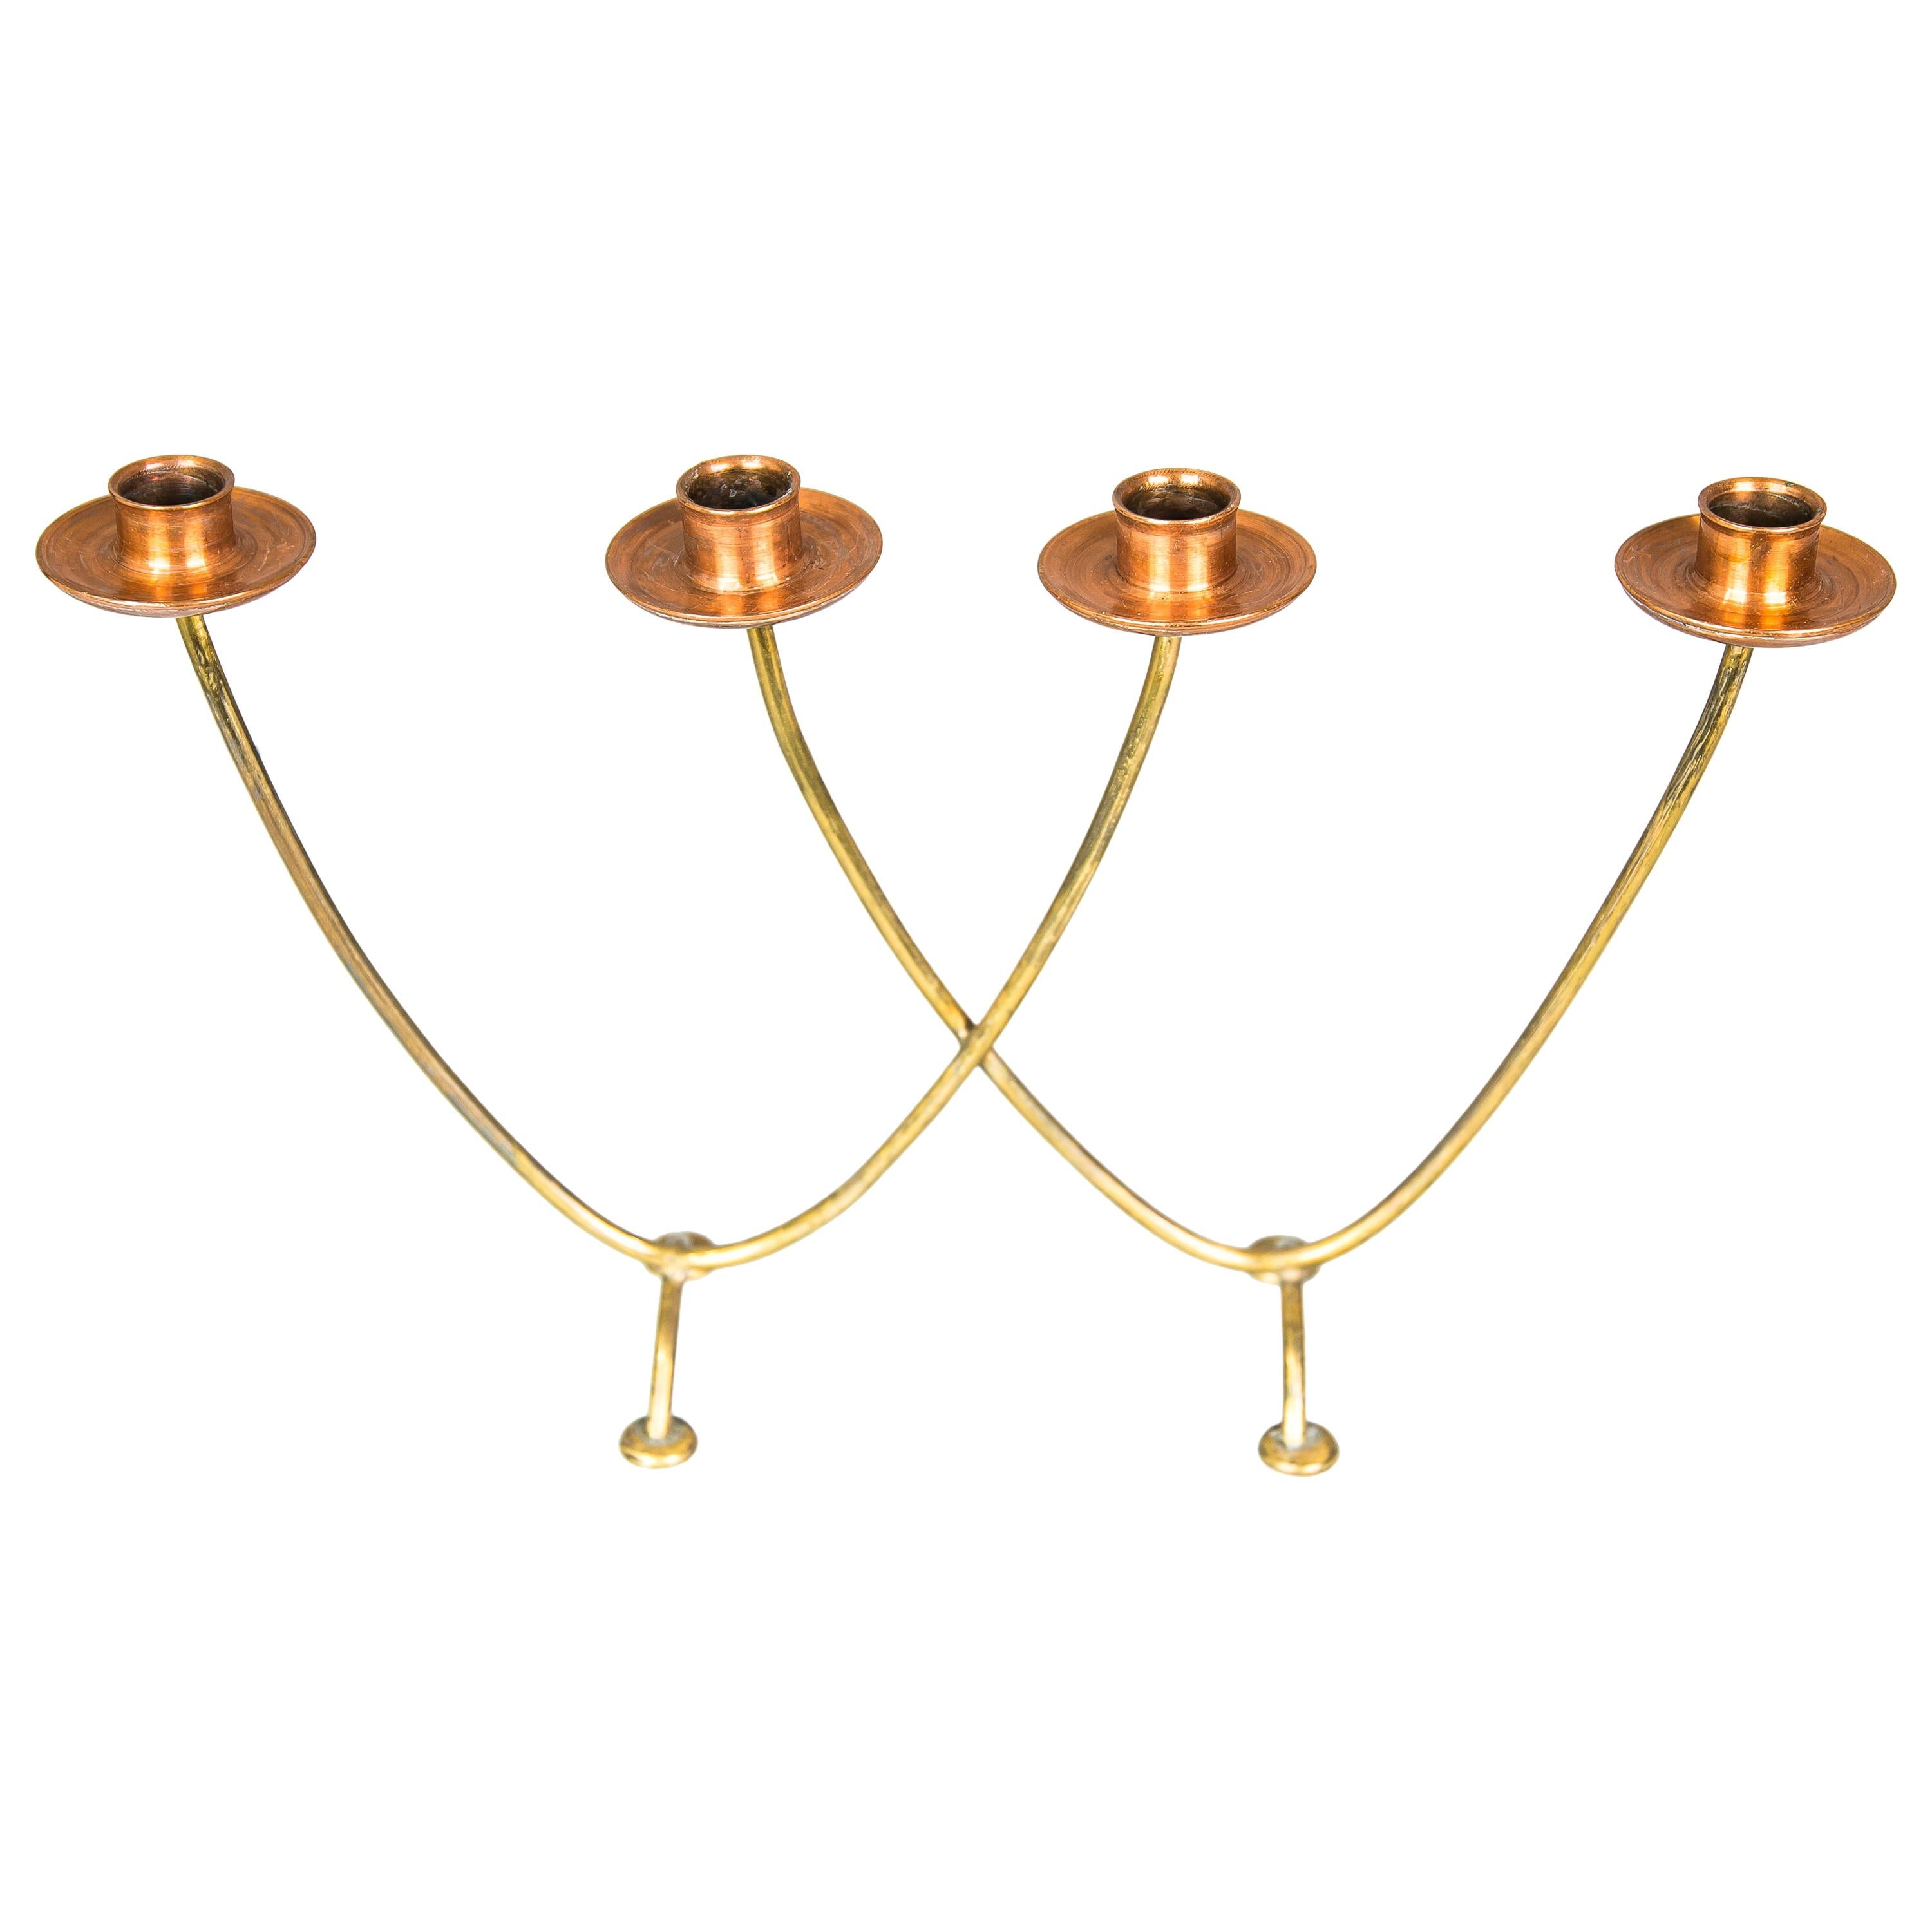 Candleholder for 4 Candles Execution in Copper and Brass, circa 1950s For Sale